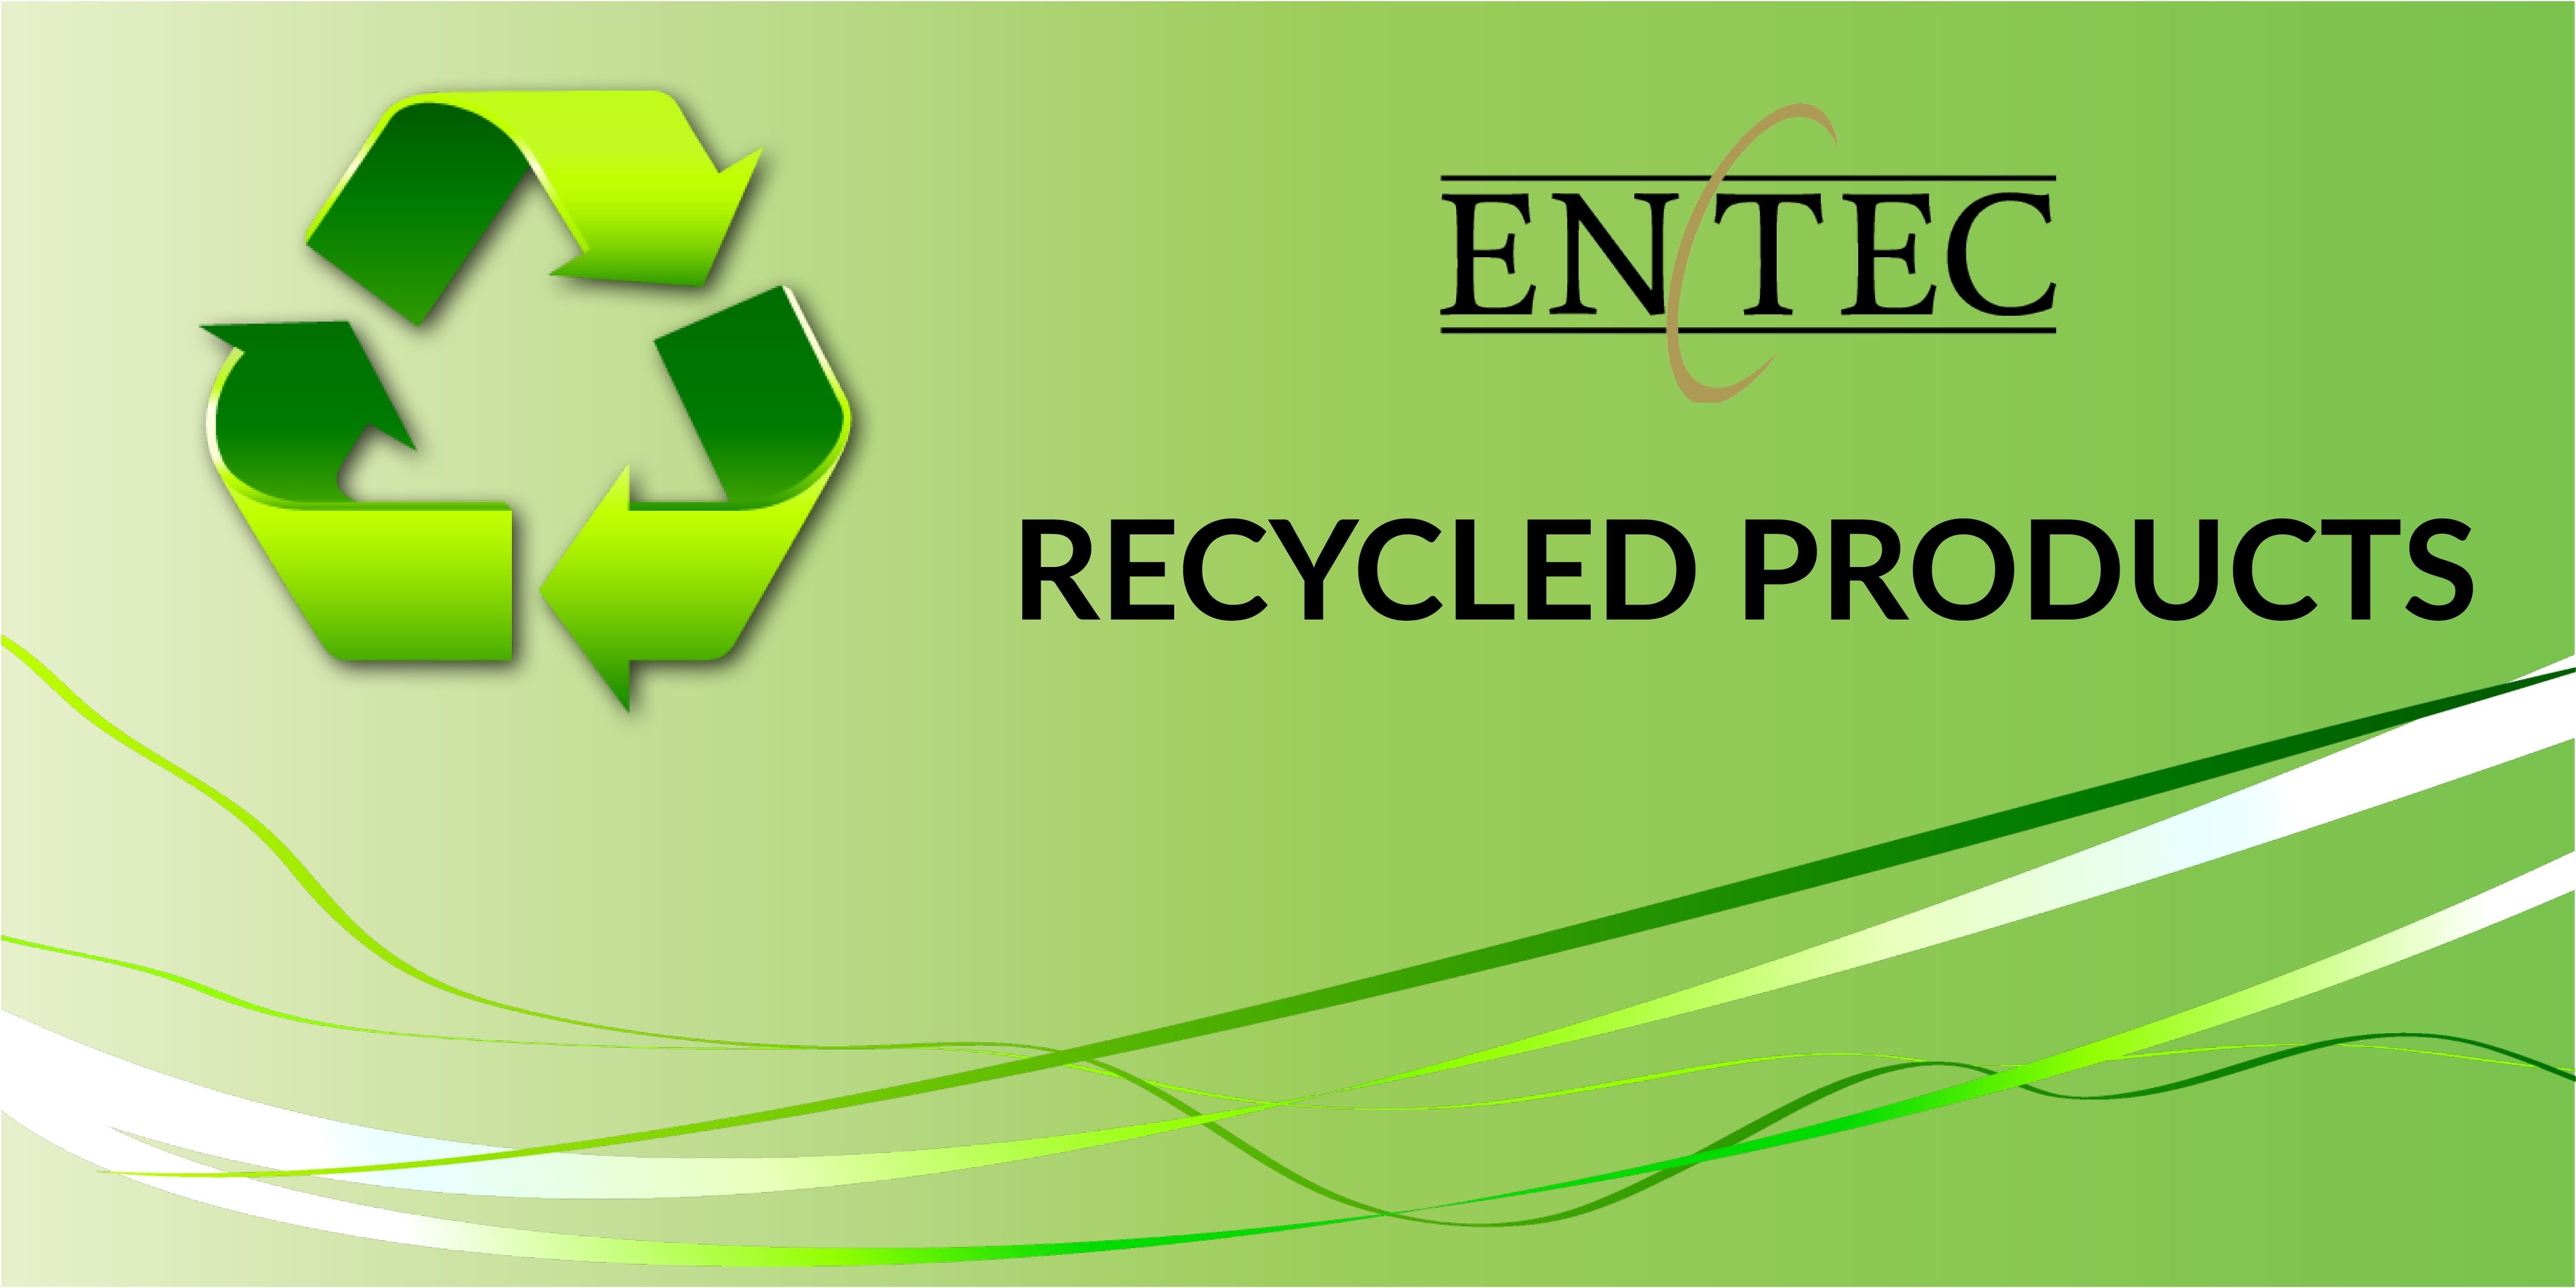 Entec Recycled Products Social Media Post